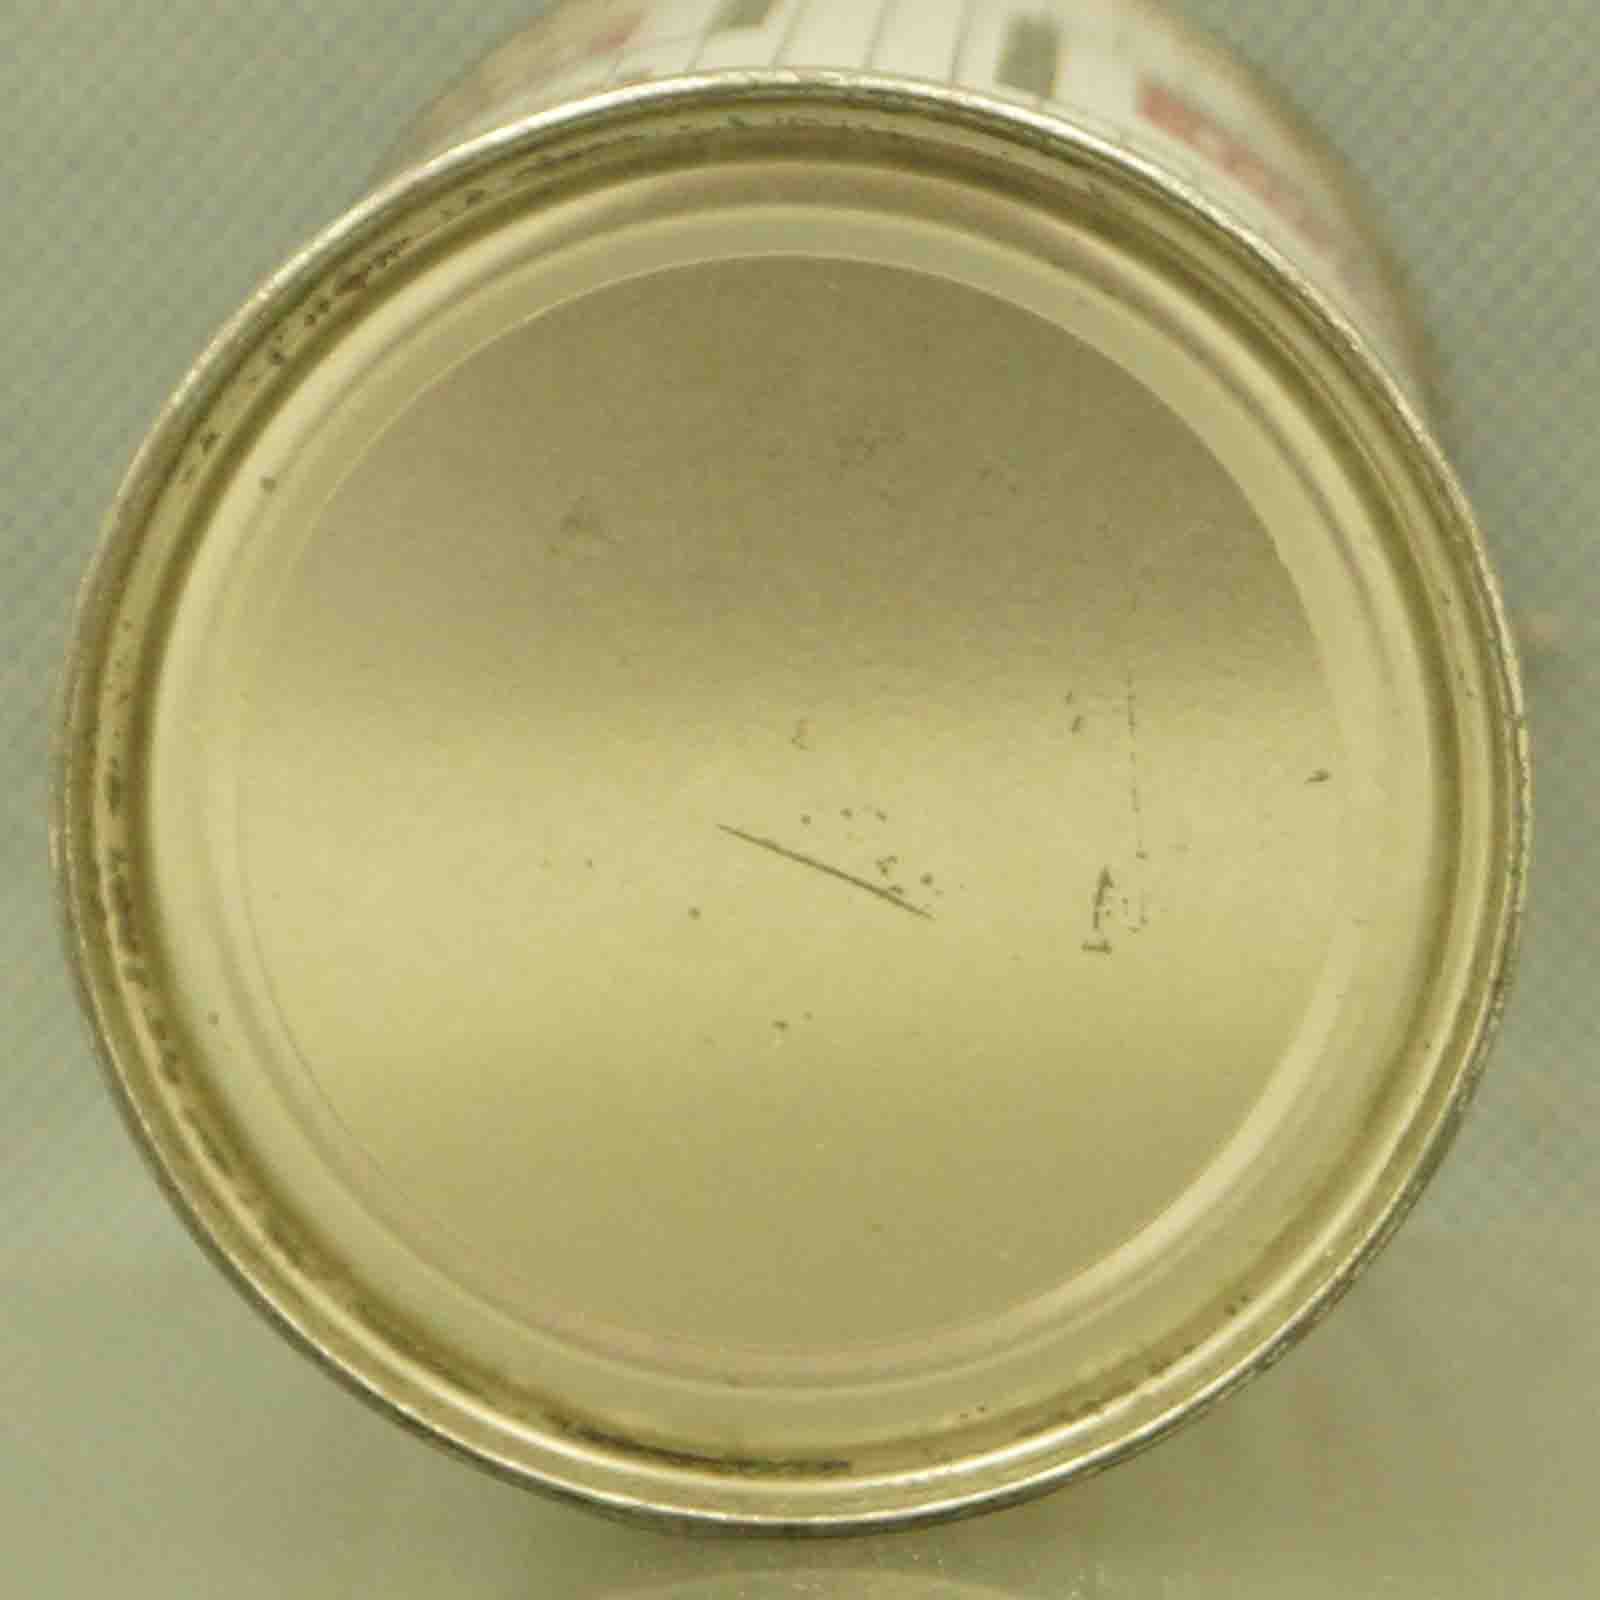 braumeister 41-17 flat top beer can 5